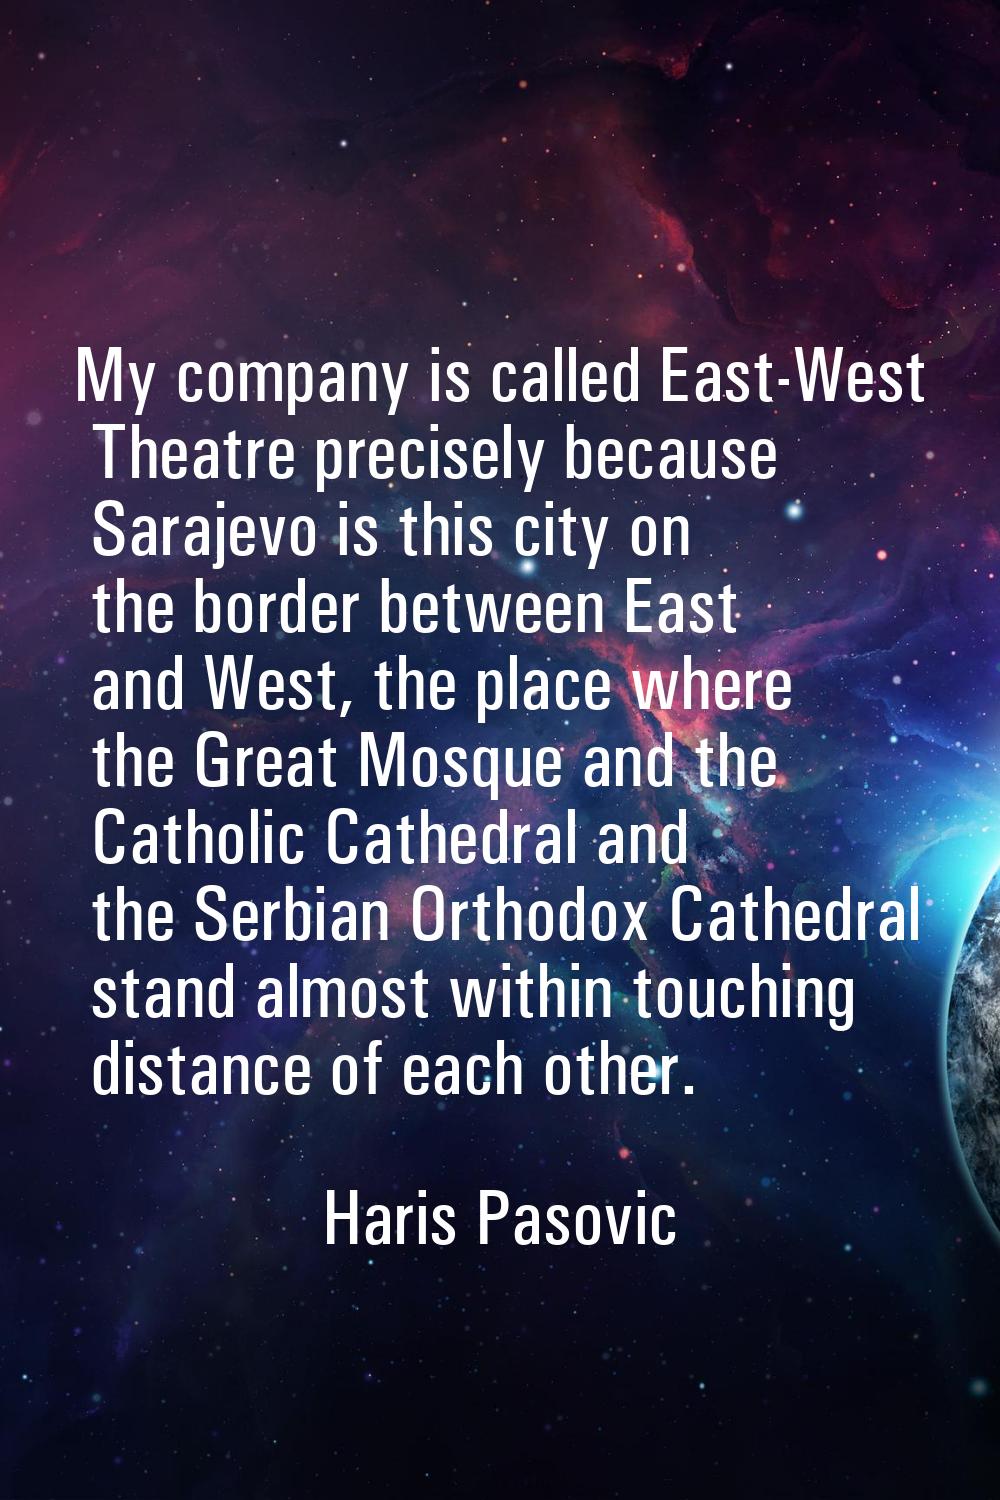 My company is called East-West Theatre precisely because Sarajevo is this city on the border betwee